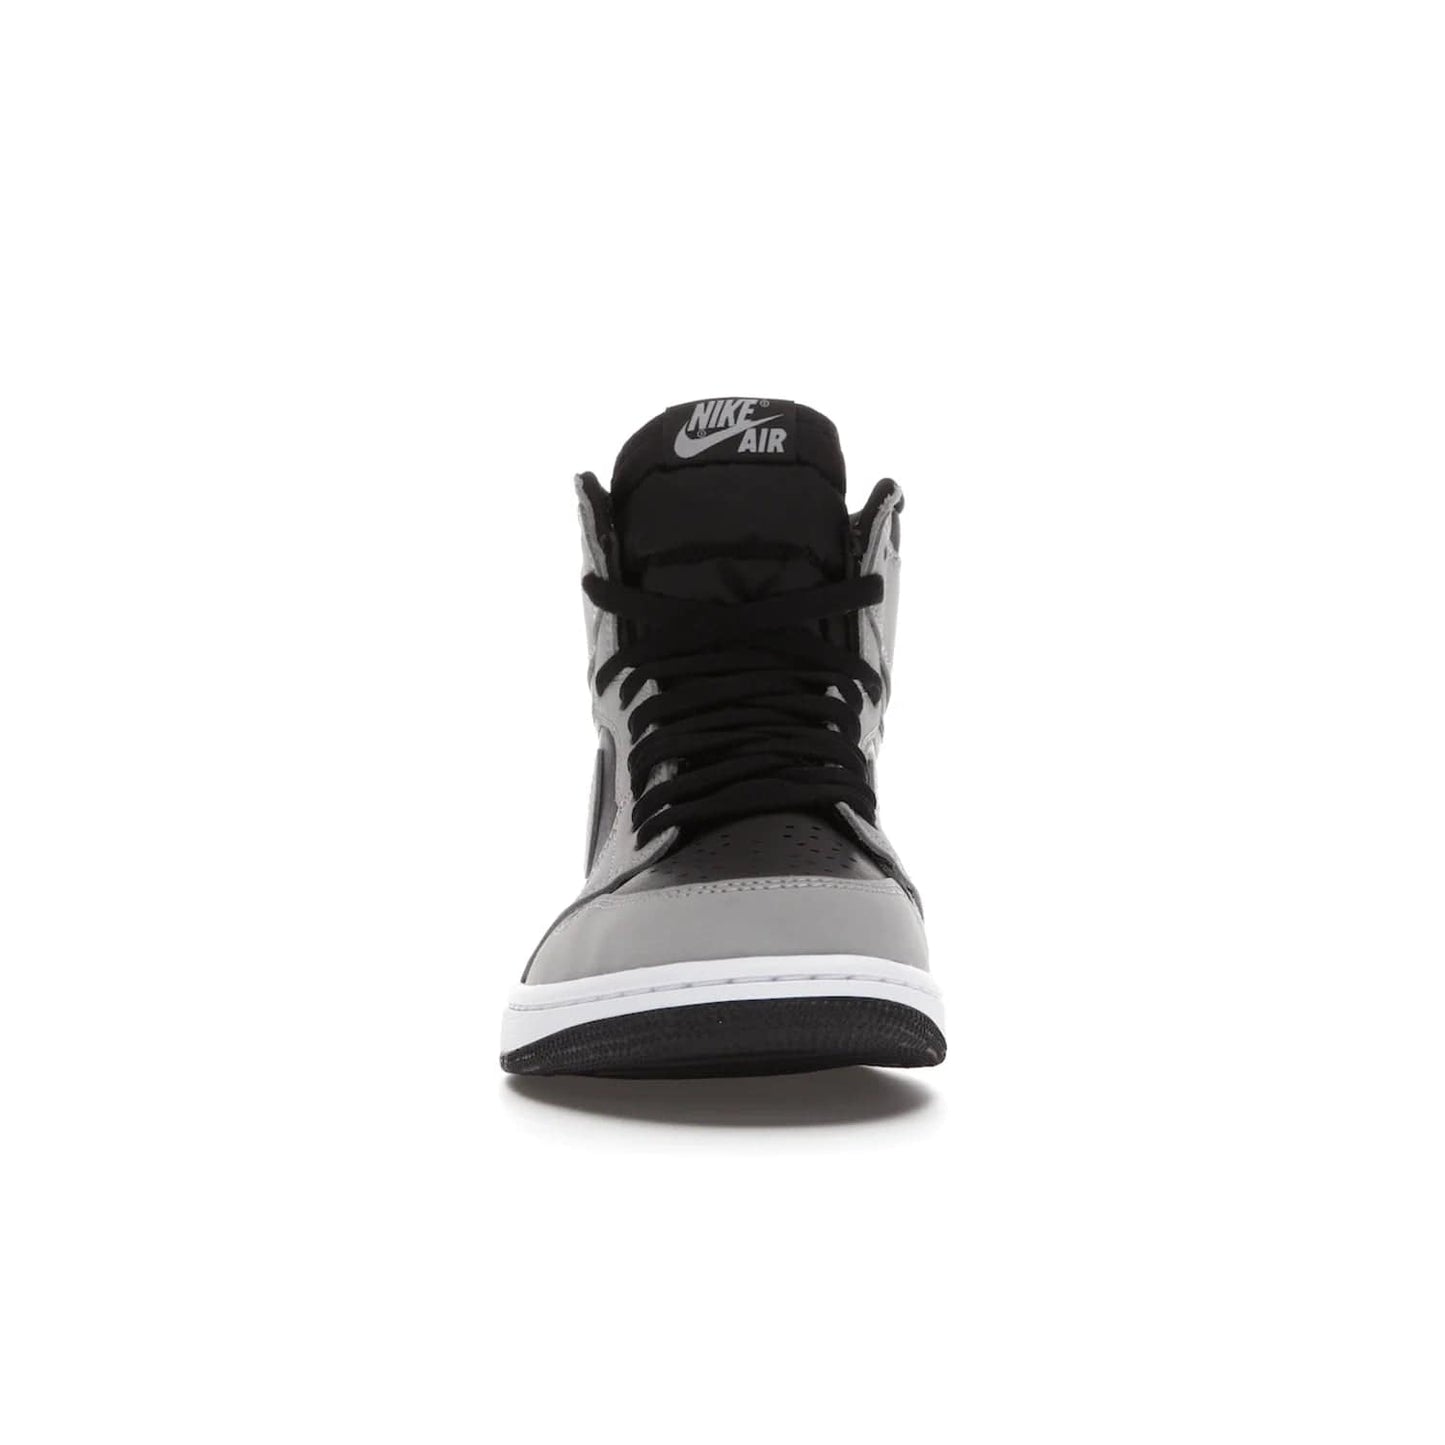 Jordan 1 Retro High Shadow 2.0 - Image 10 - Only at www.BallersClubKickz.com - #
Classic Air Jordan 1 Retro High Shadow 2.0 with black leather base and Light Smoke Grey overlays. Released in May 2021.